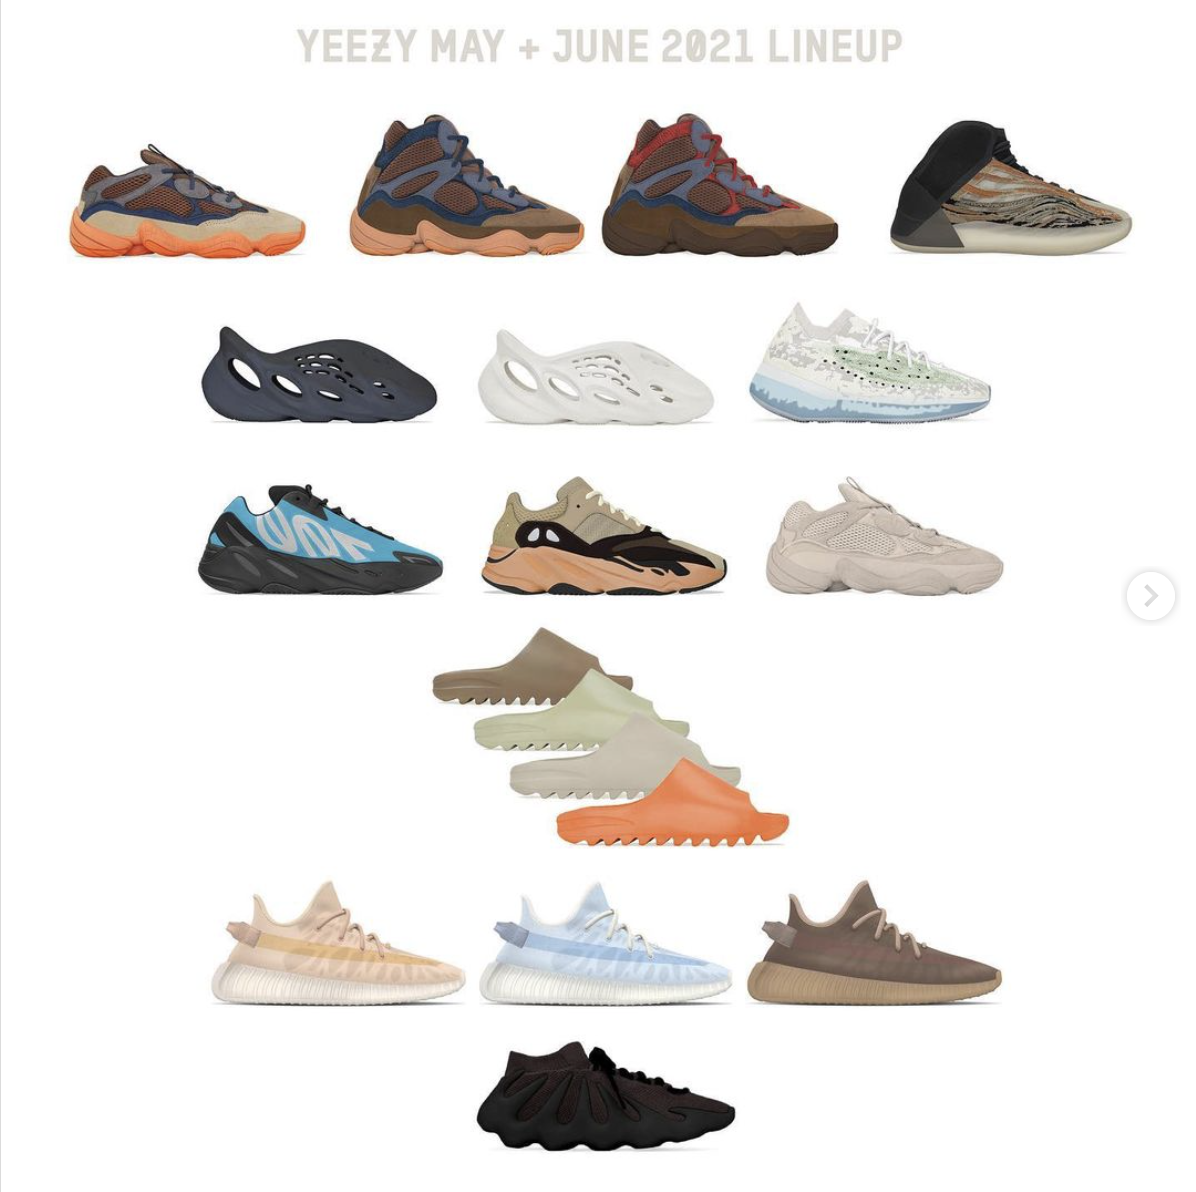 Adidas Yeezy Loads Up for New Releases